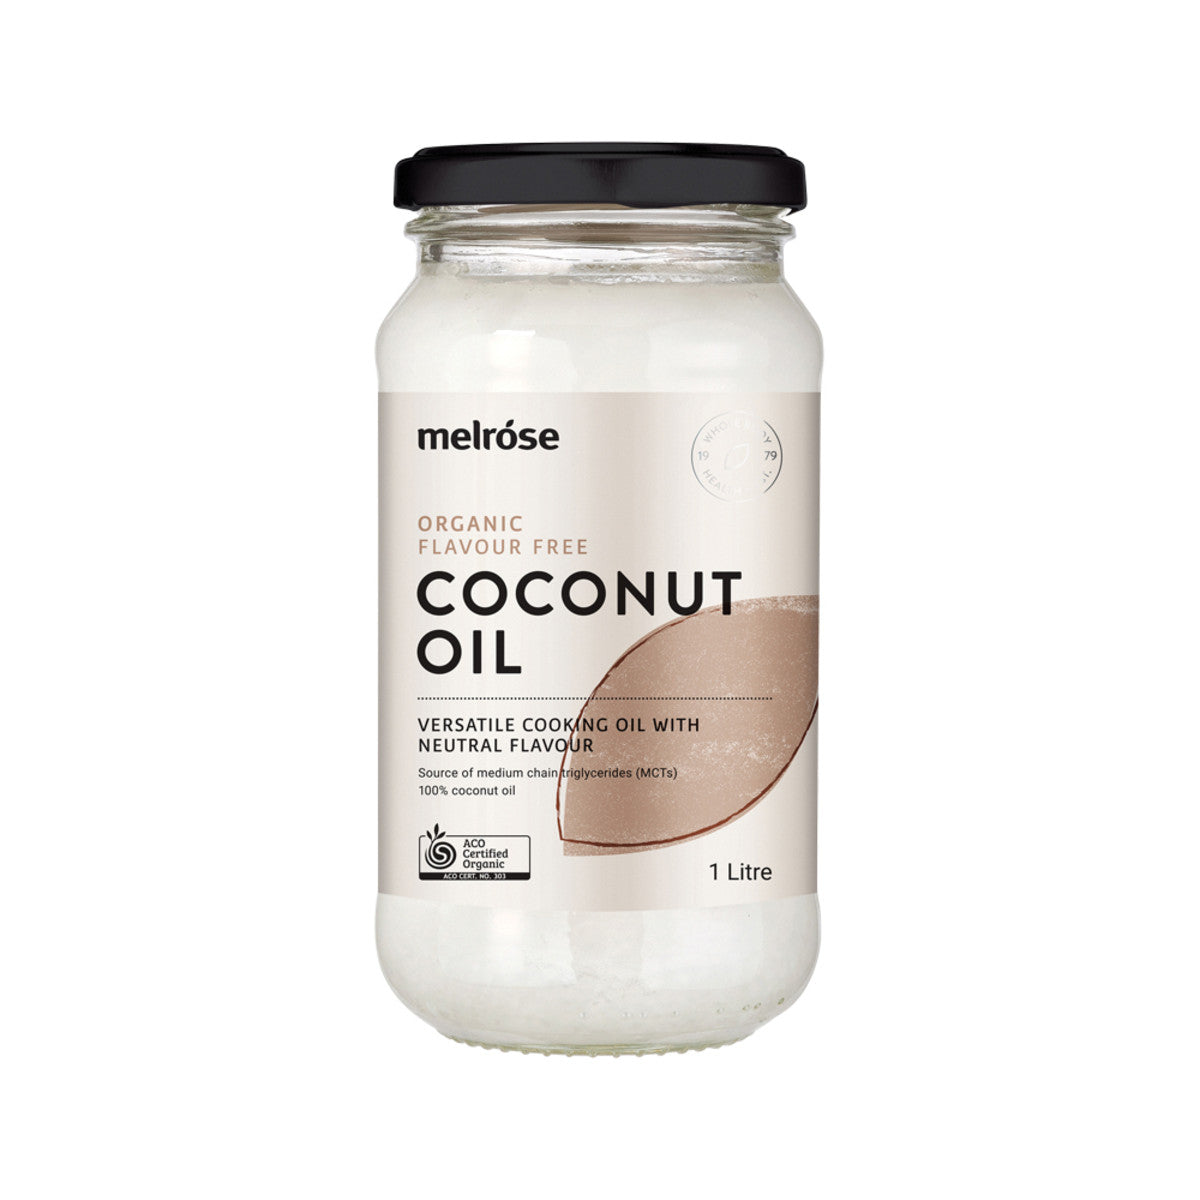 Melrose - Organic Coconut Oil Flavour Free